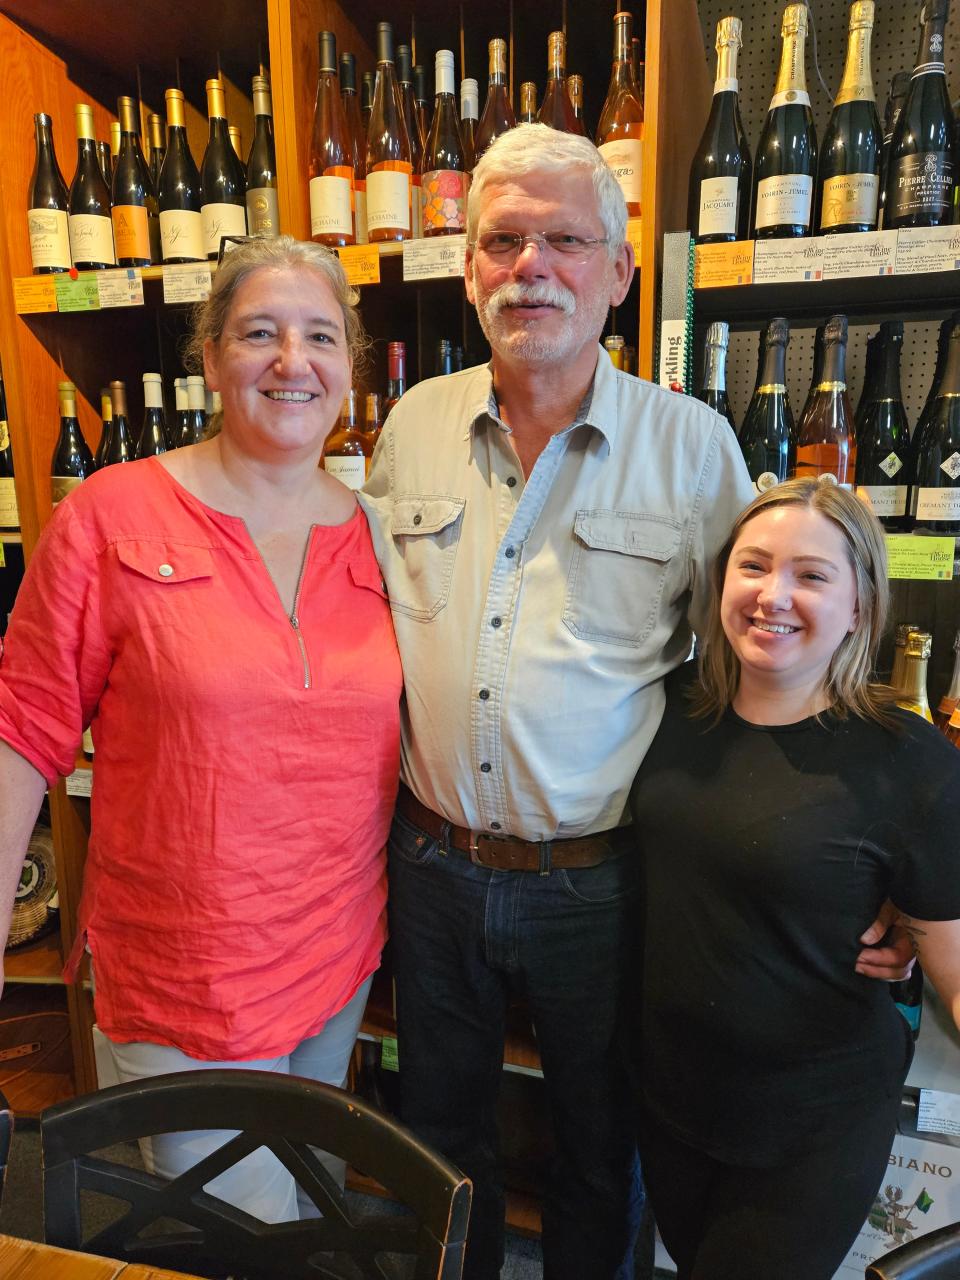 German-born Frederick and Claudia Mursch, the Wine House’s owners, and Sandra Davidson, its General Manager, have been running the shop since 2019. People flock to Thursdays when fresh bay oysters are shucked and served with a tempting white wine.